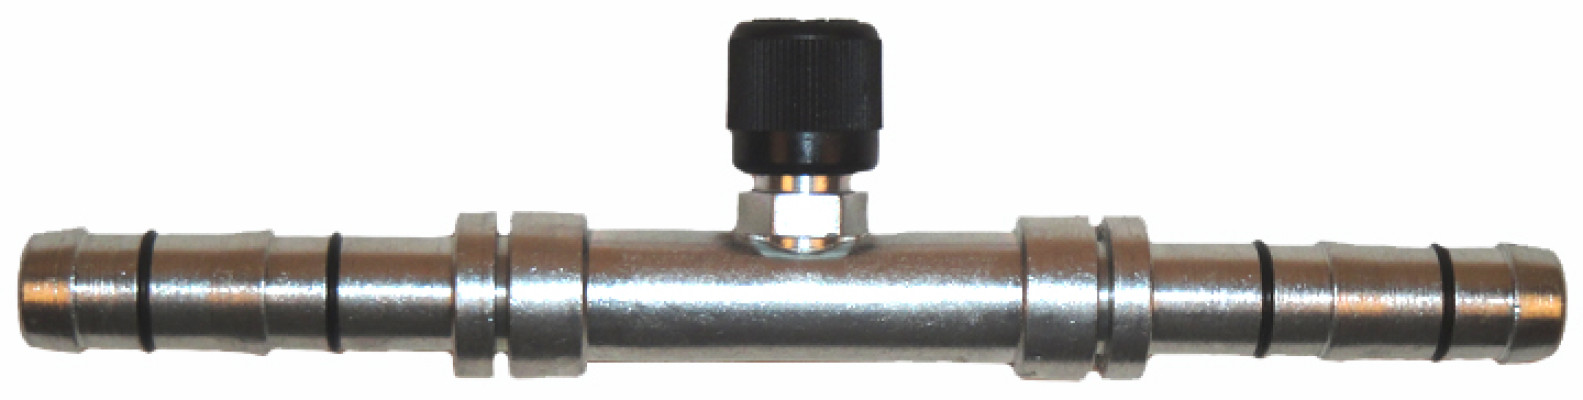 Image of A/C Refrigerant Hose Fitting from Sunair. Part number: FJ3171-0808S